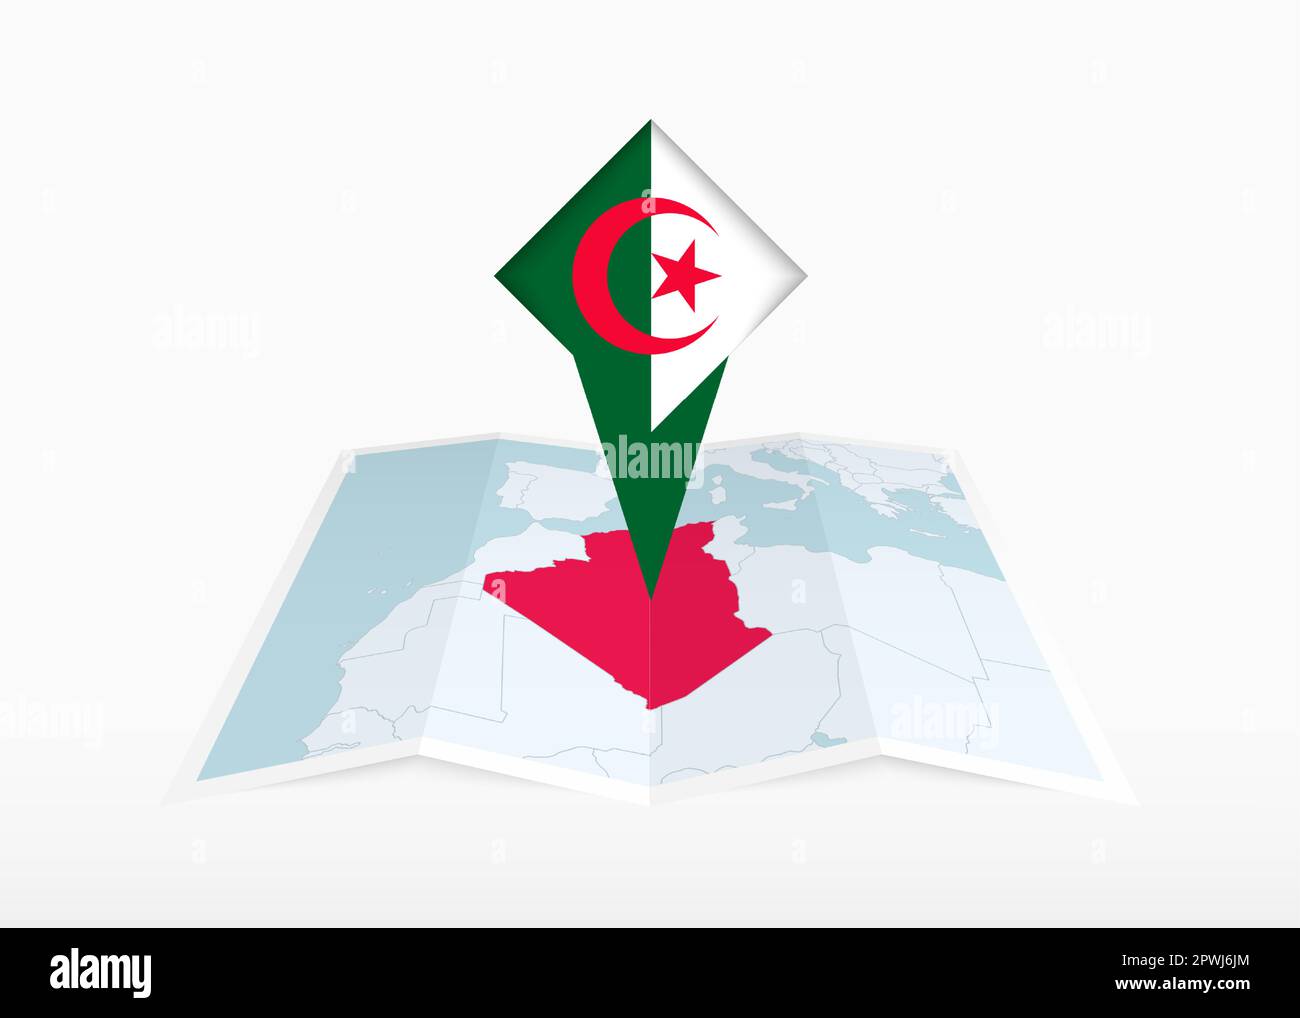 Algeria is depicted on a folded paper map and pinned location marker with flag of Algeria. Folded vector map. Stock Vector